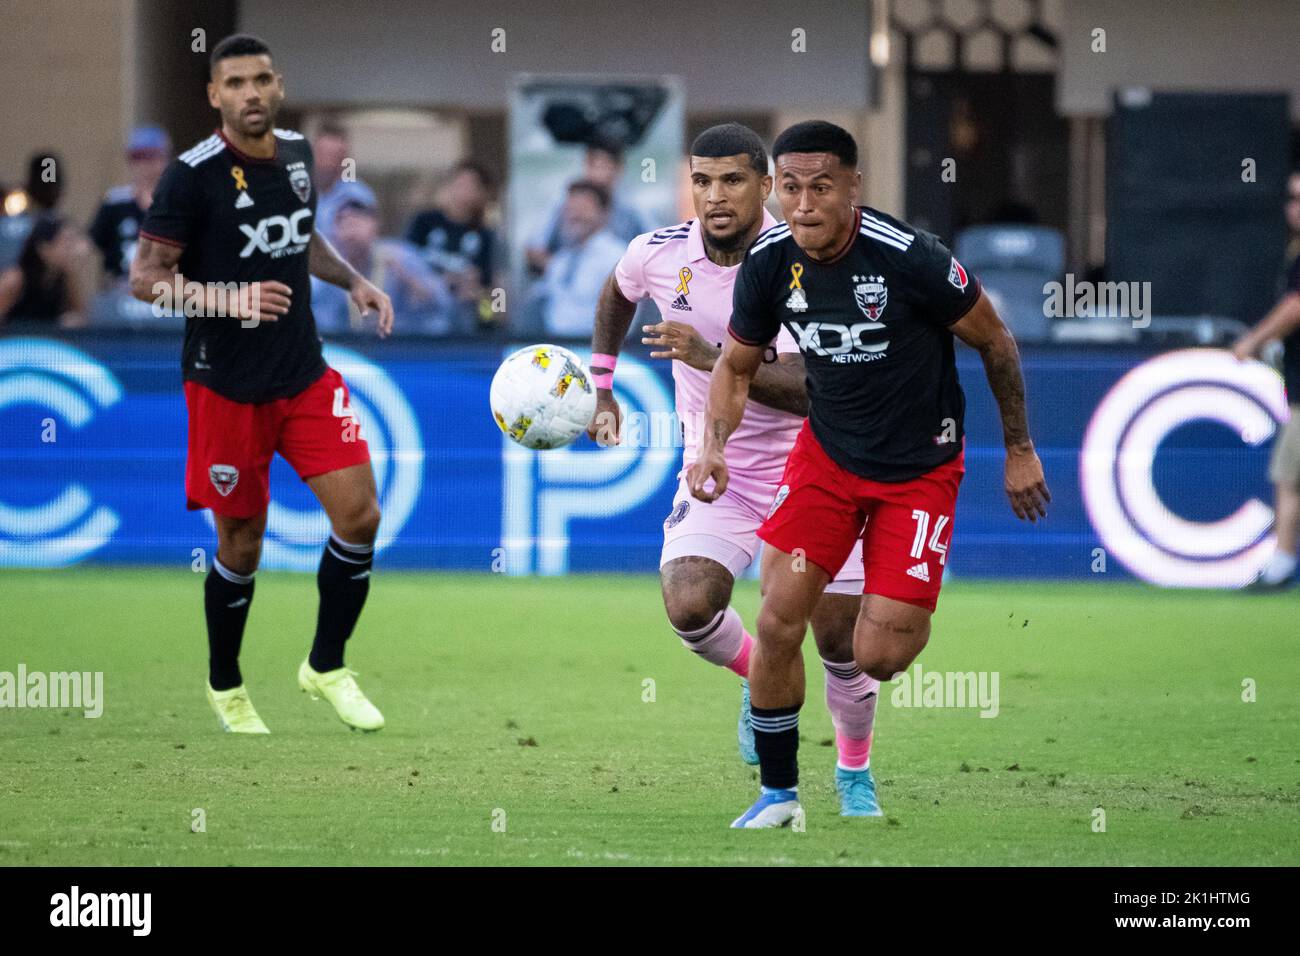 Washington DC, USA. 18th Sep, 2022. United defender Andy Najar dribbles the ball under pressure from Miami defender DeAndre Yedlin during a 2-3 DC United defeat vs. Inter Miami CF in Major League Soccer (MLS), at Audi Field, in Washington, DC, on Sunday, September 18, 2022. (Graeme Sloan/Sipa USA) Credit: Sipa USA/Alamy Live News Stock Photo